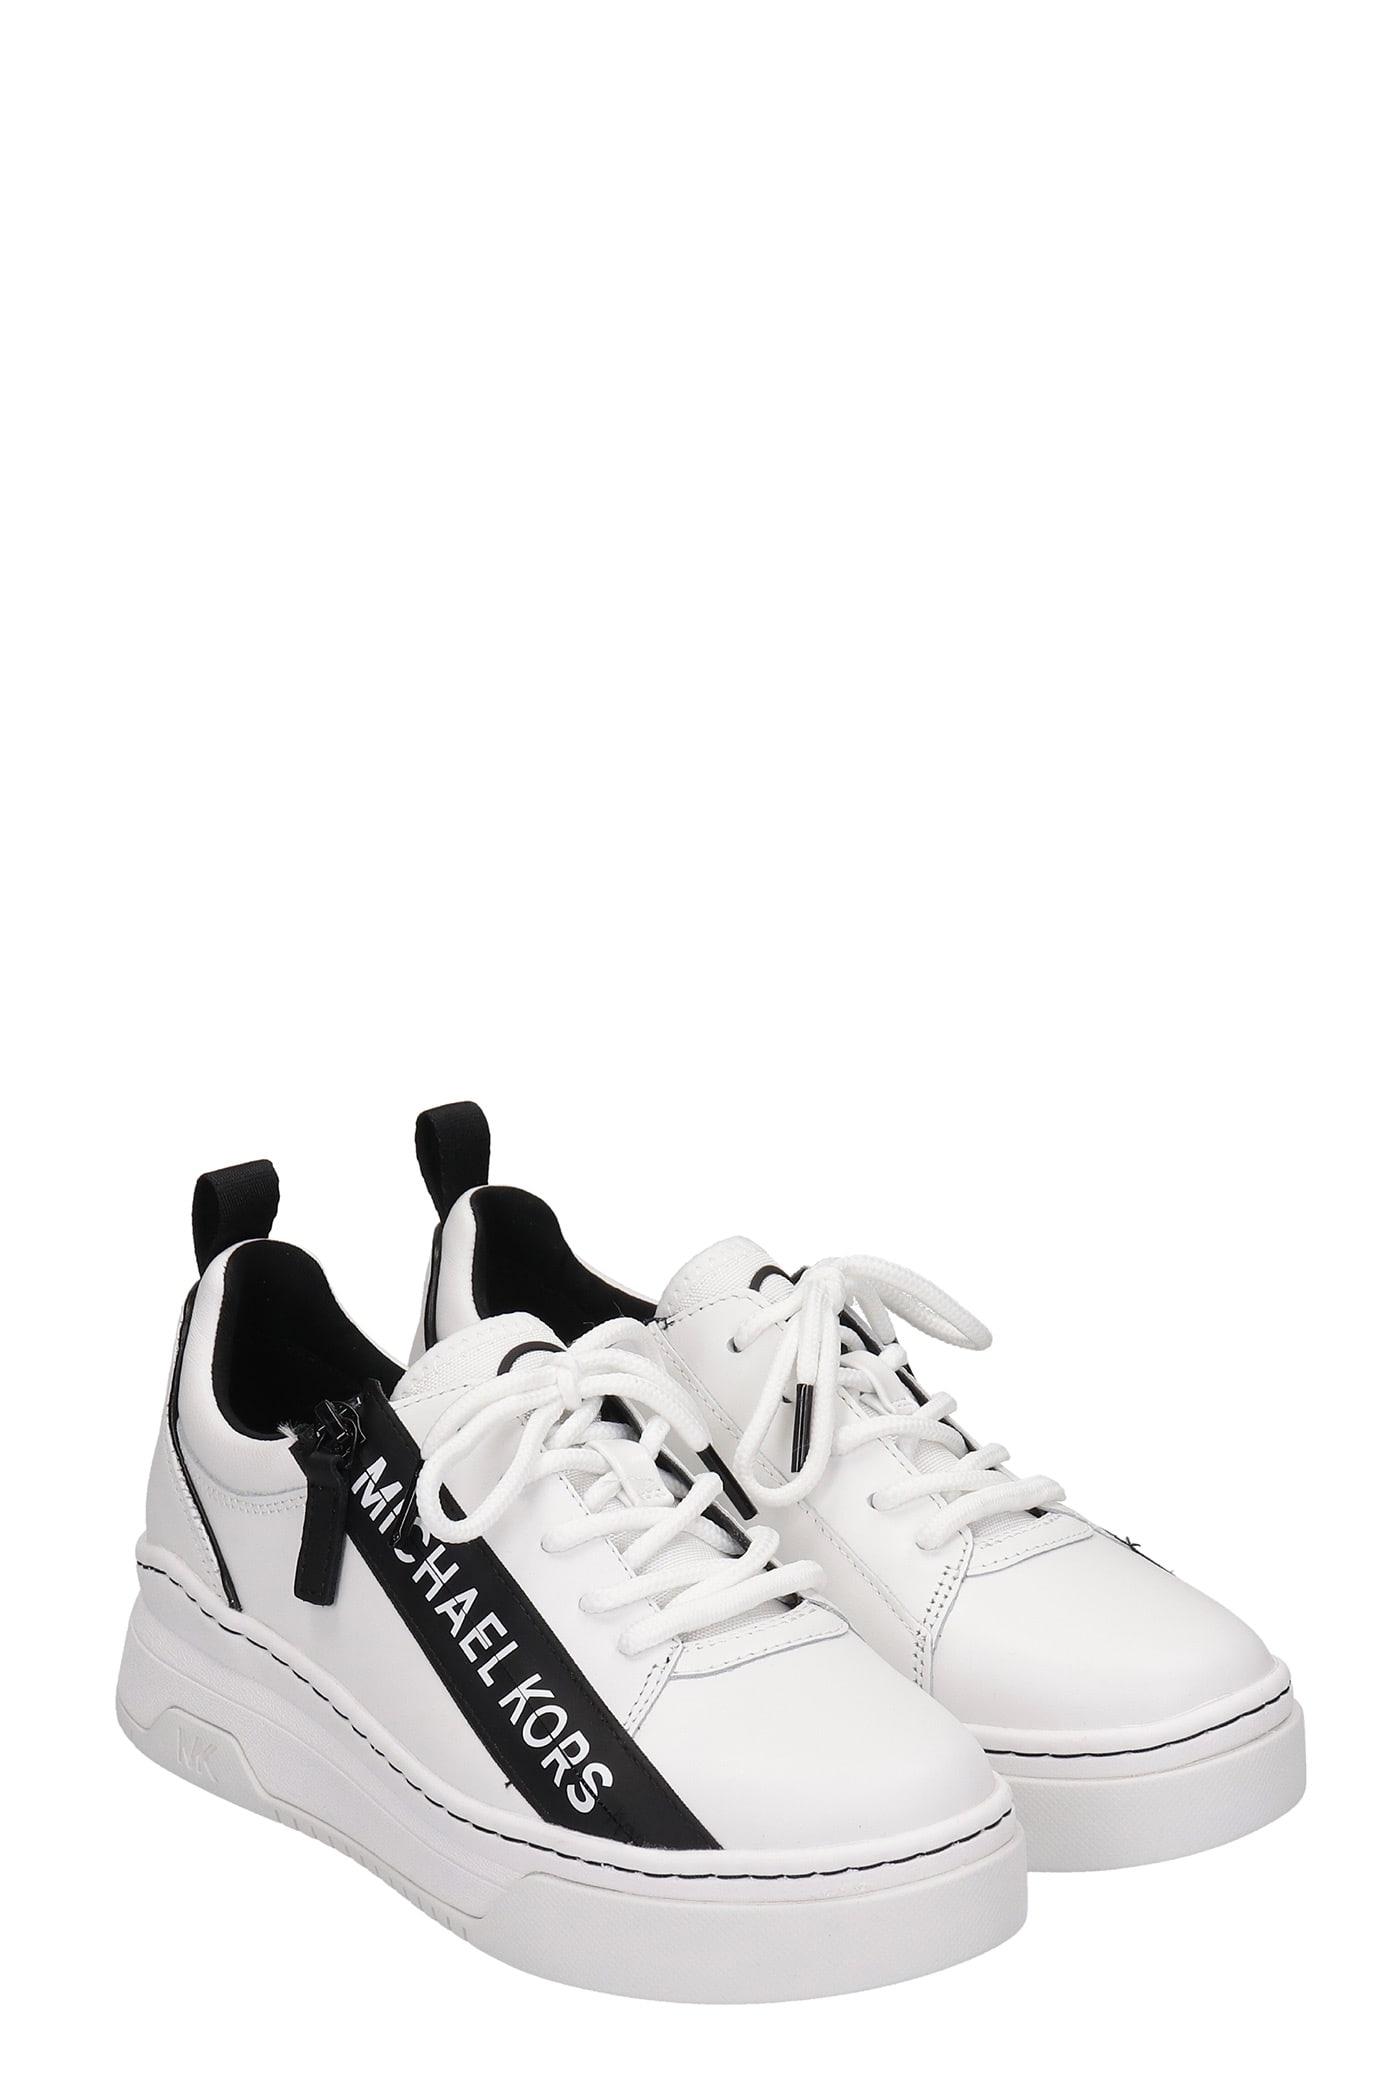 Michael Kors Alex Sneakers In Leather in White - Lyst